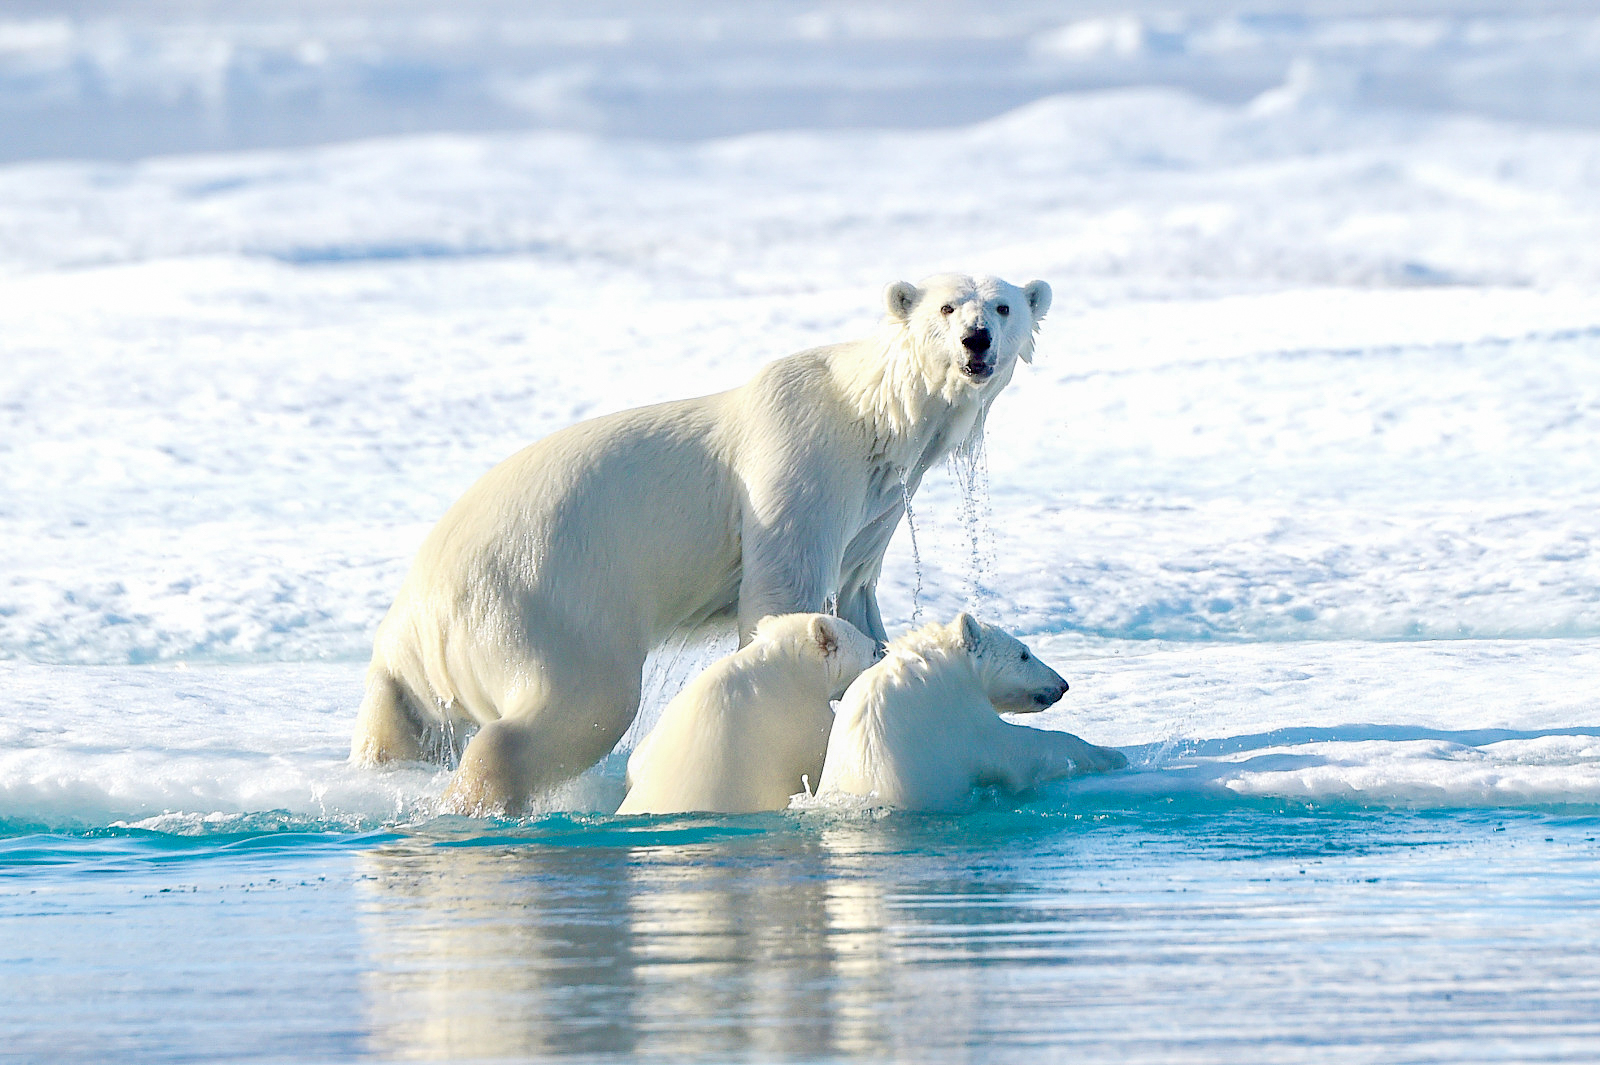 Polar Bears spotted in the Arctic from a Ponant cruise ship